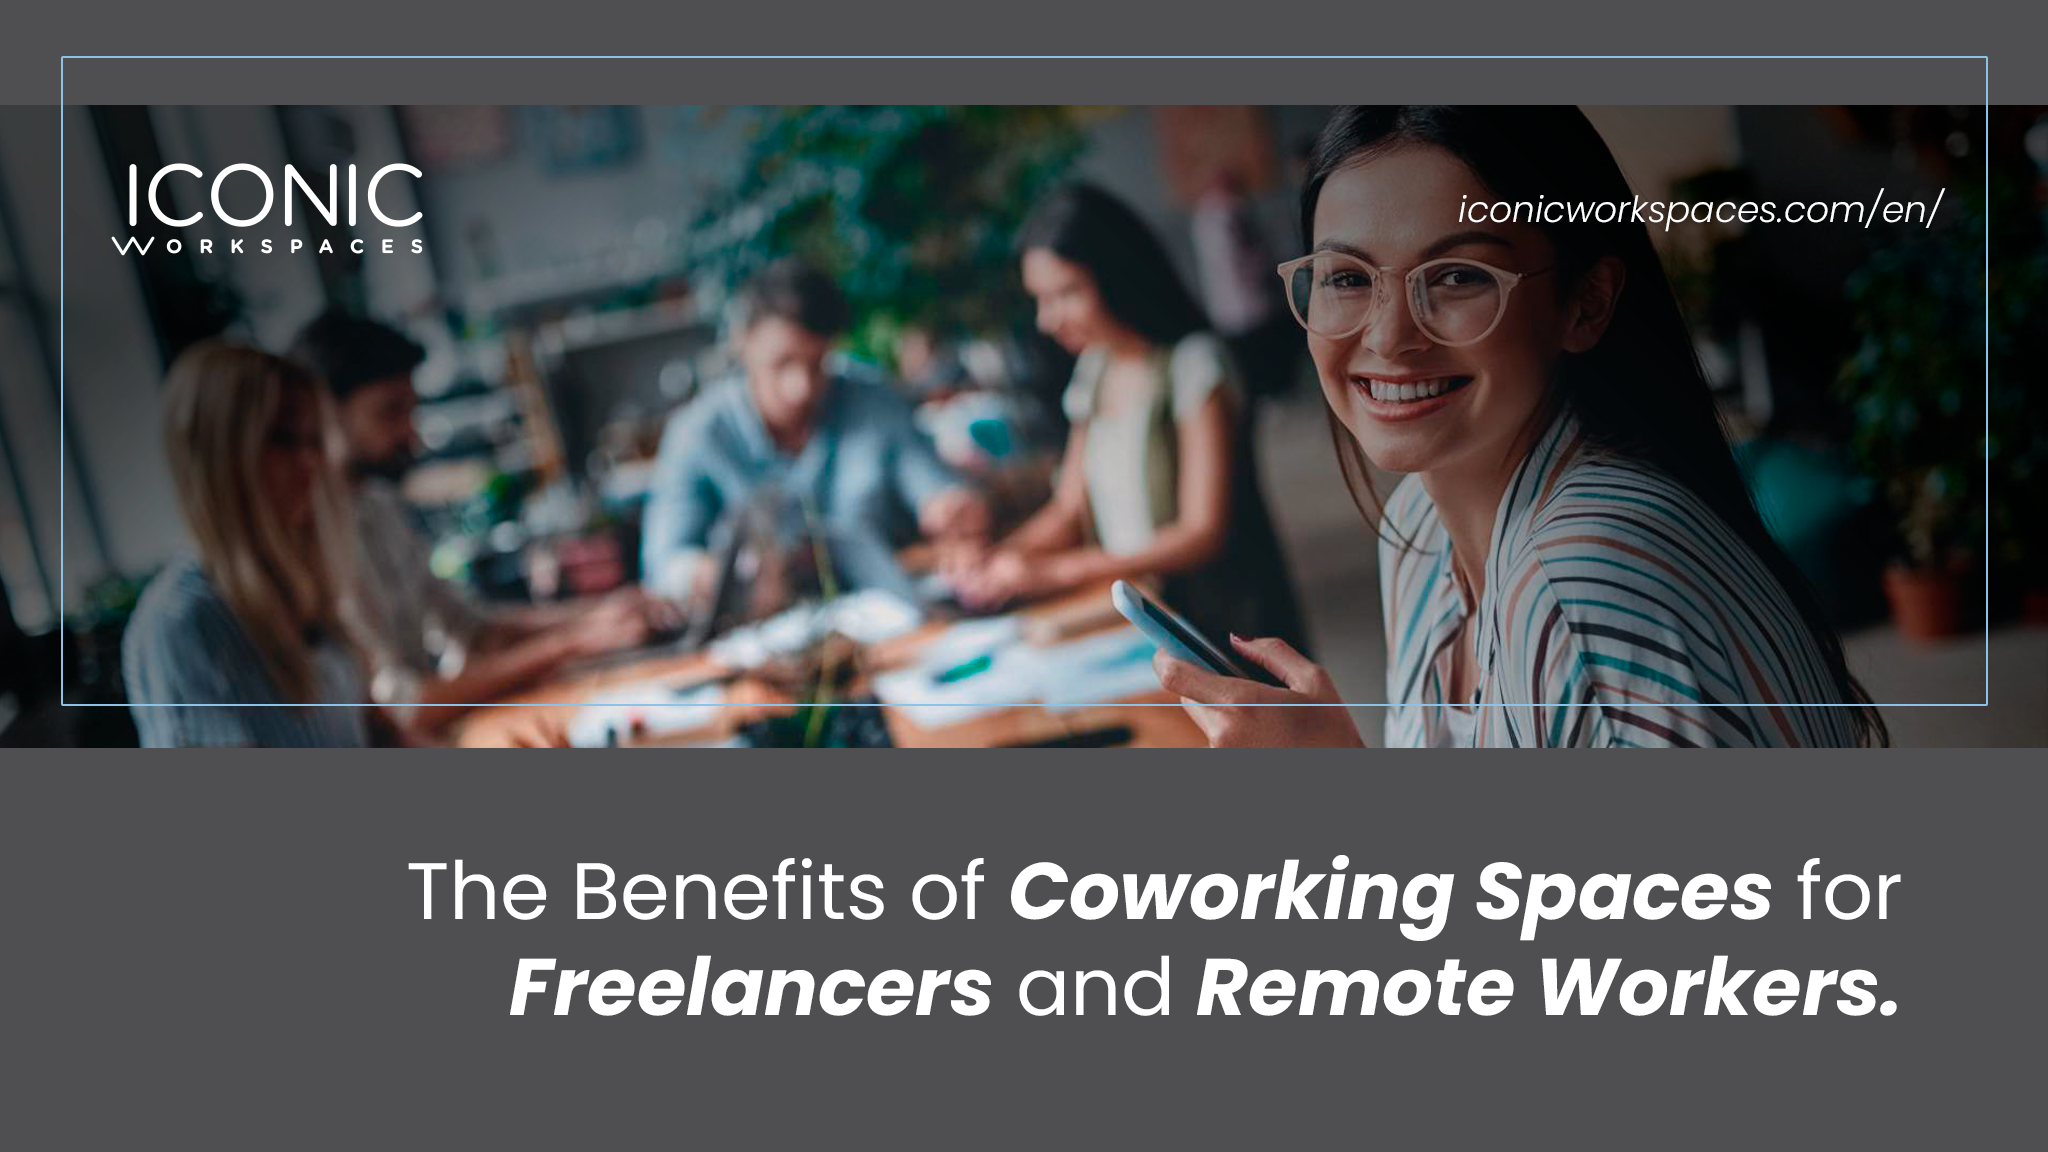 Title: The Benefits of Coworking Spaces for Freelancers and Remote Workers